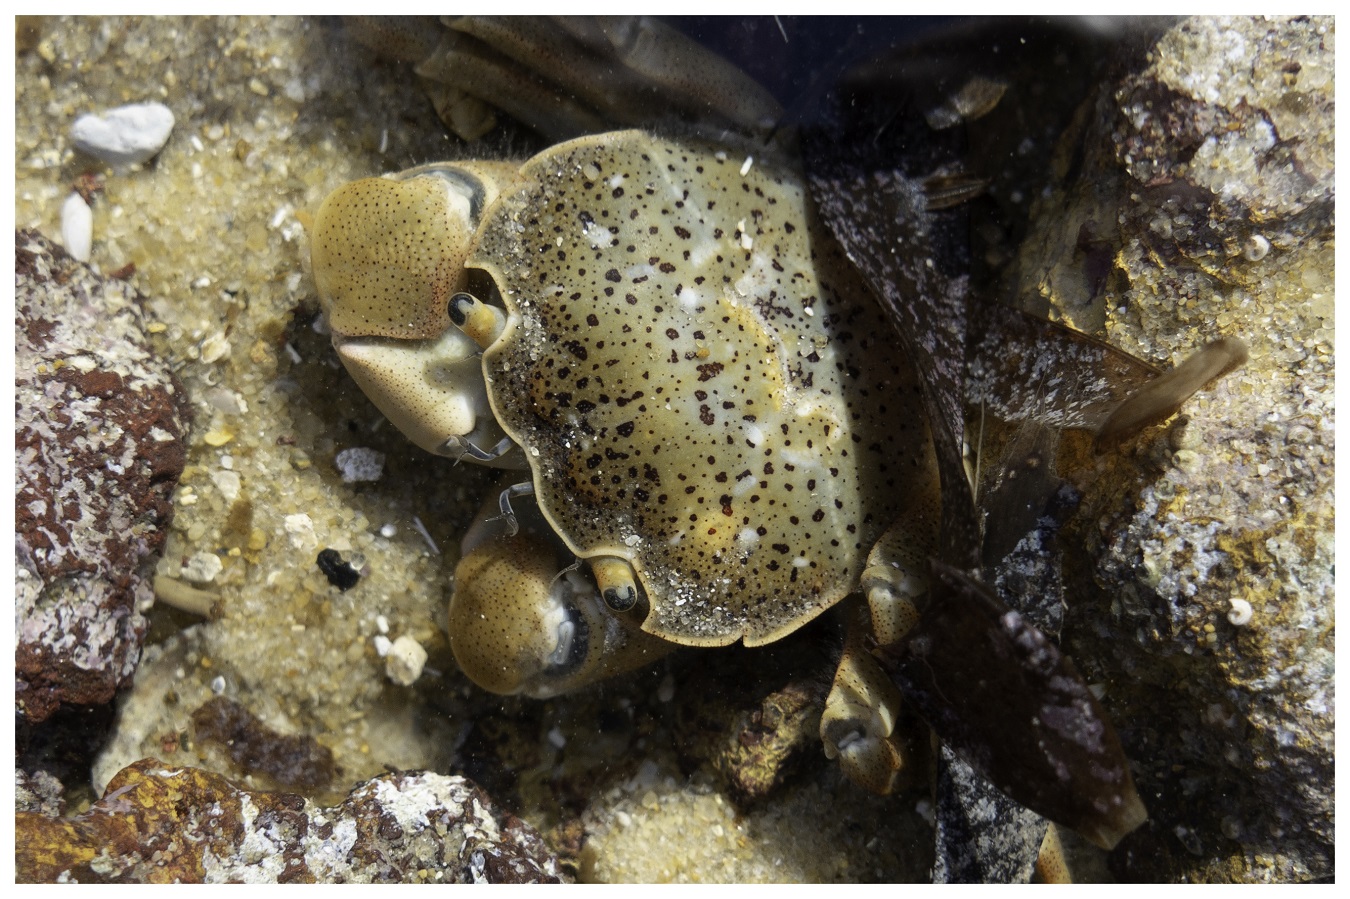 Weekly Creature Feature: Do you know what type of crab this is?